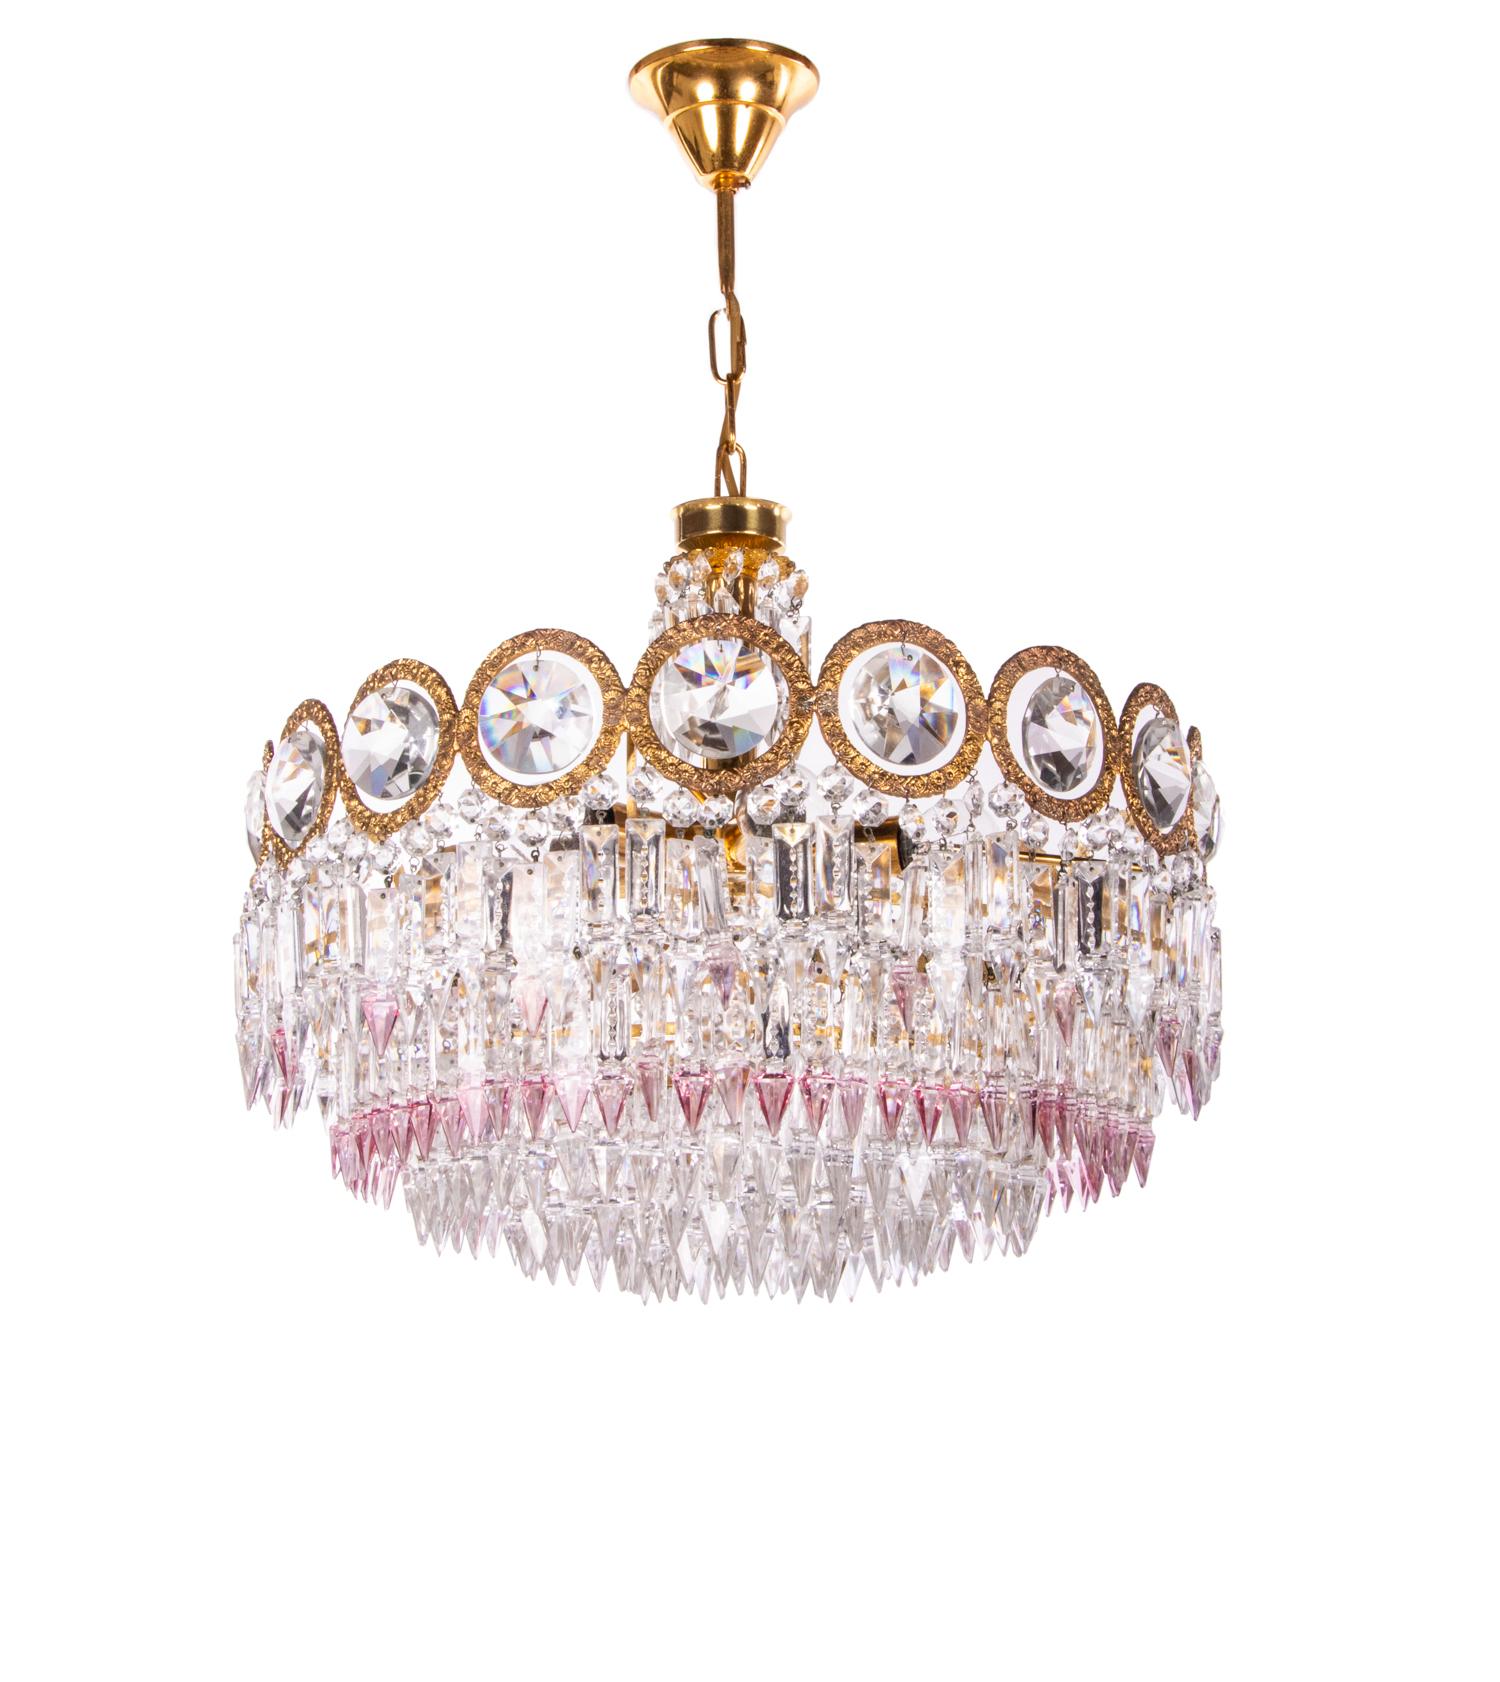 Elegant chandelier with a brass frame and Swarovski crystals in clear and some with lavender lace amongst them. These lamps have an incomparable unique character. A touch of luxury fills the room. 
Manufactured in Germany in the 1960s.